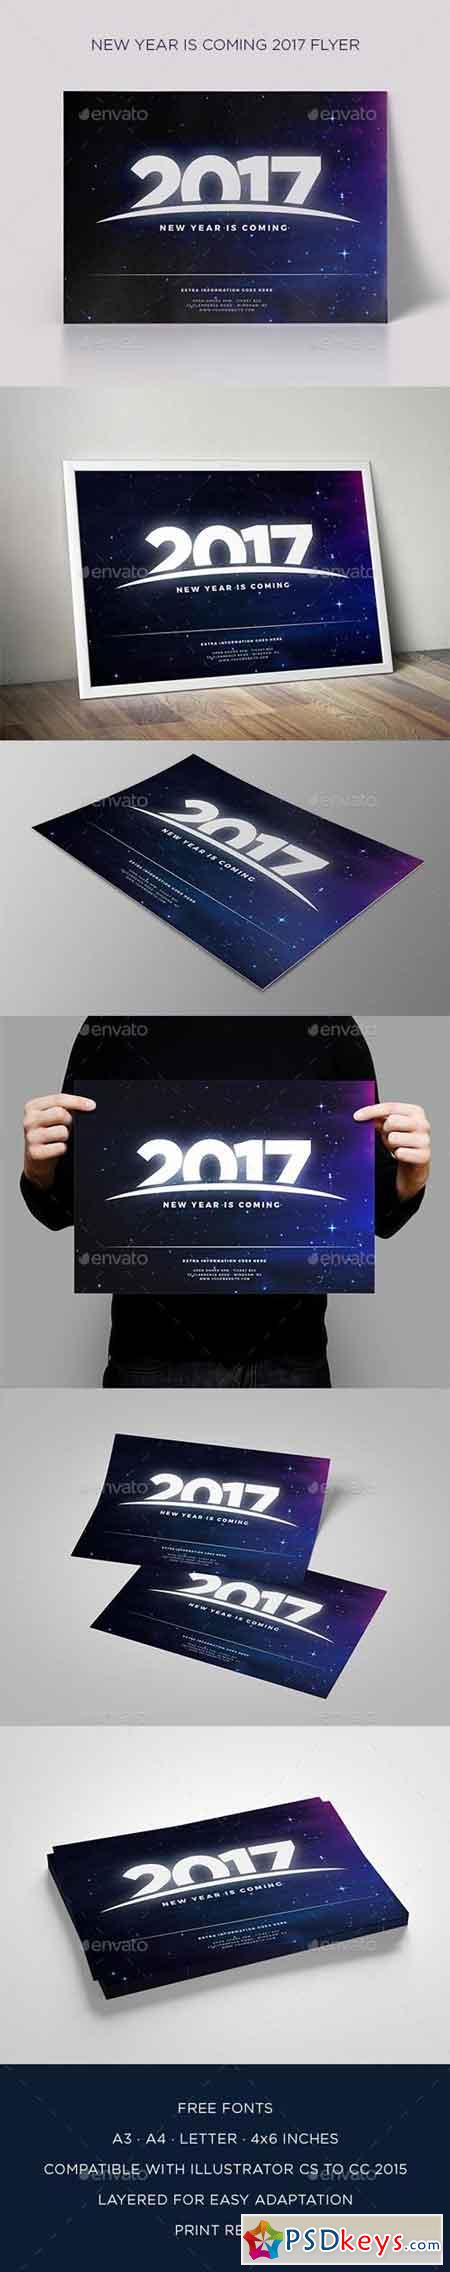 New Year Coming 2017 Flyer 18274189